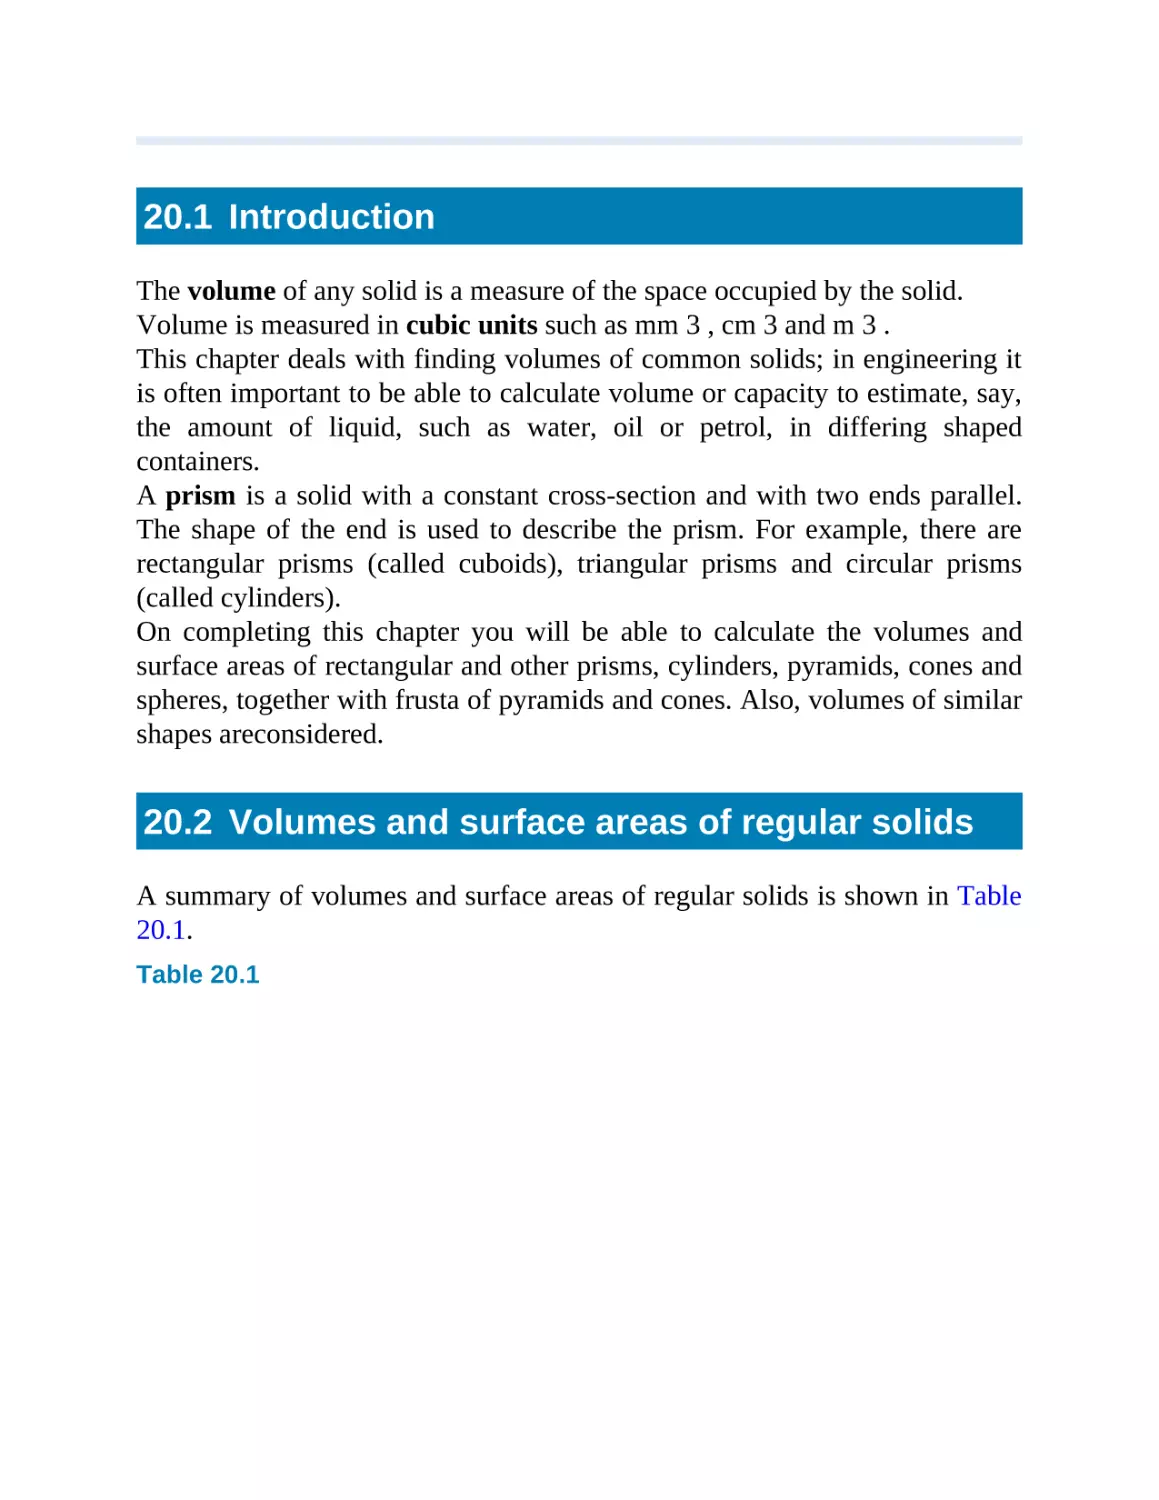 20.1 Introduction
20.2 Volumes and surface areas of regular solids